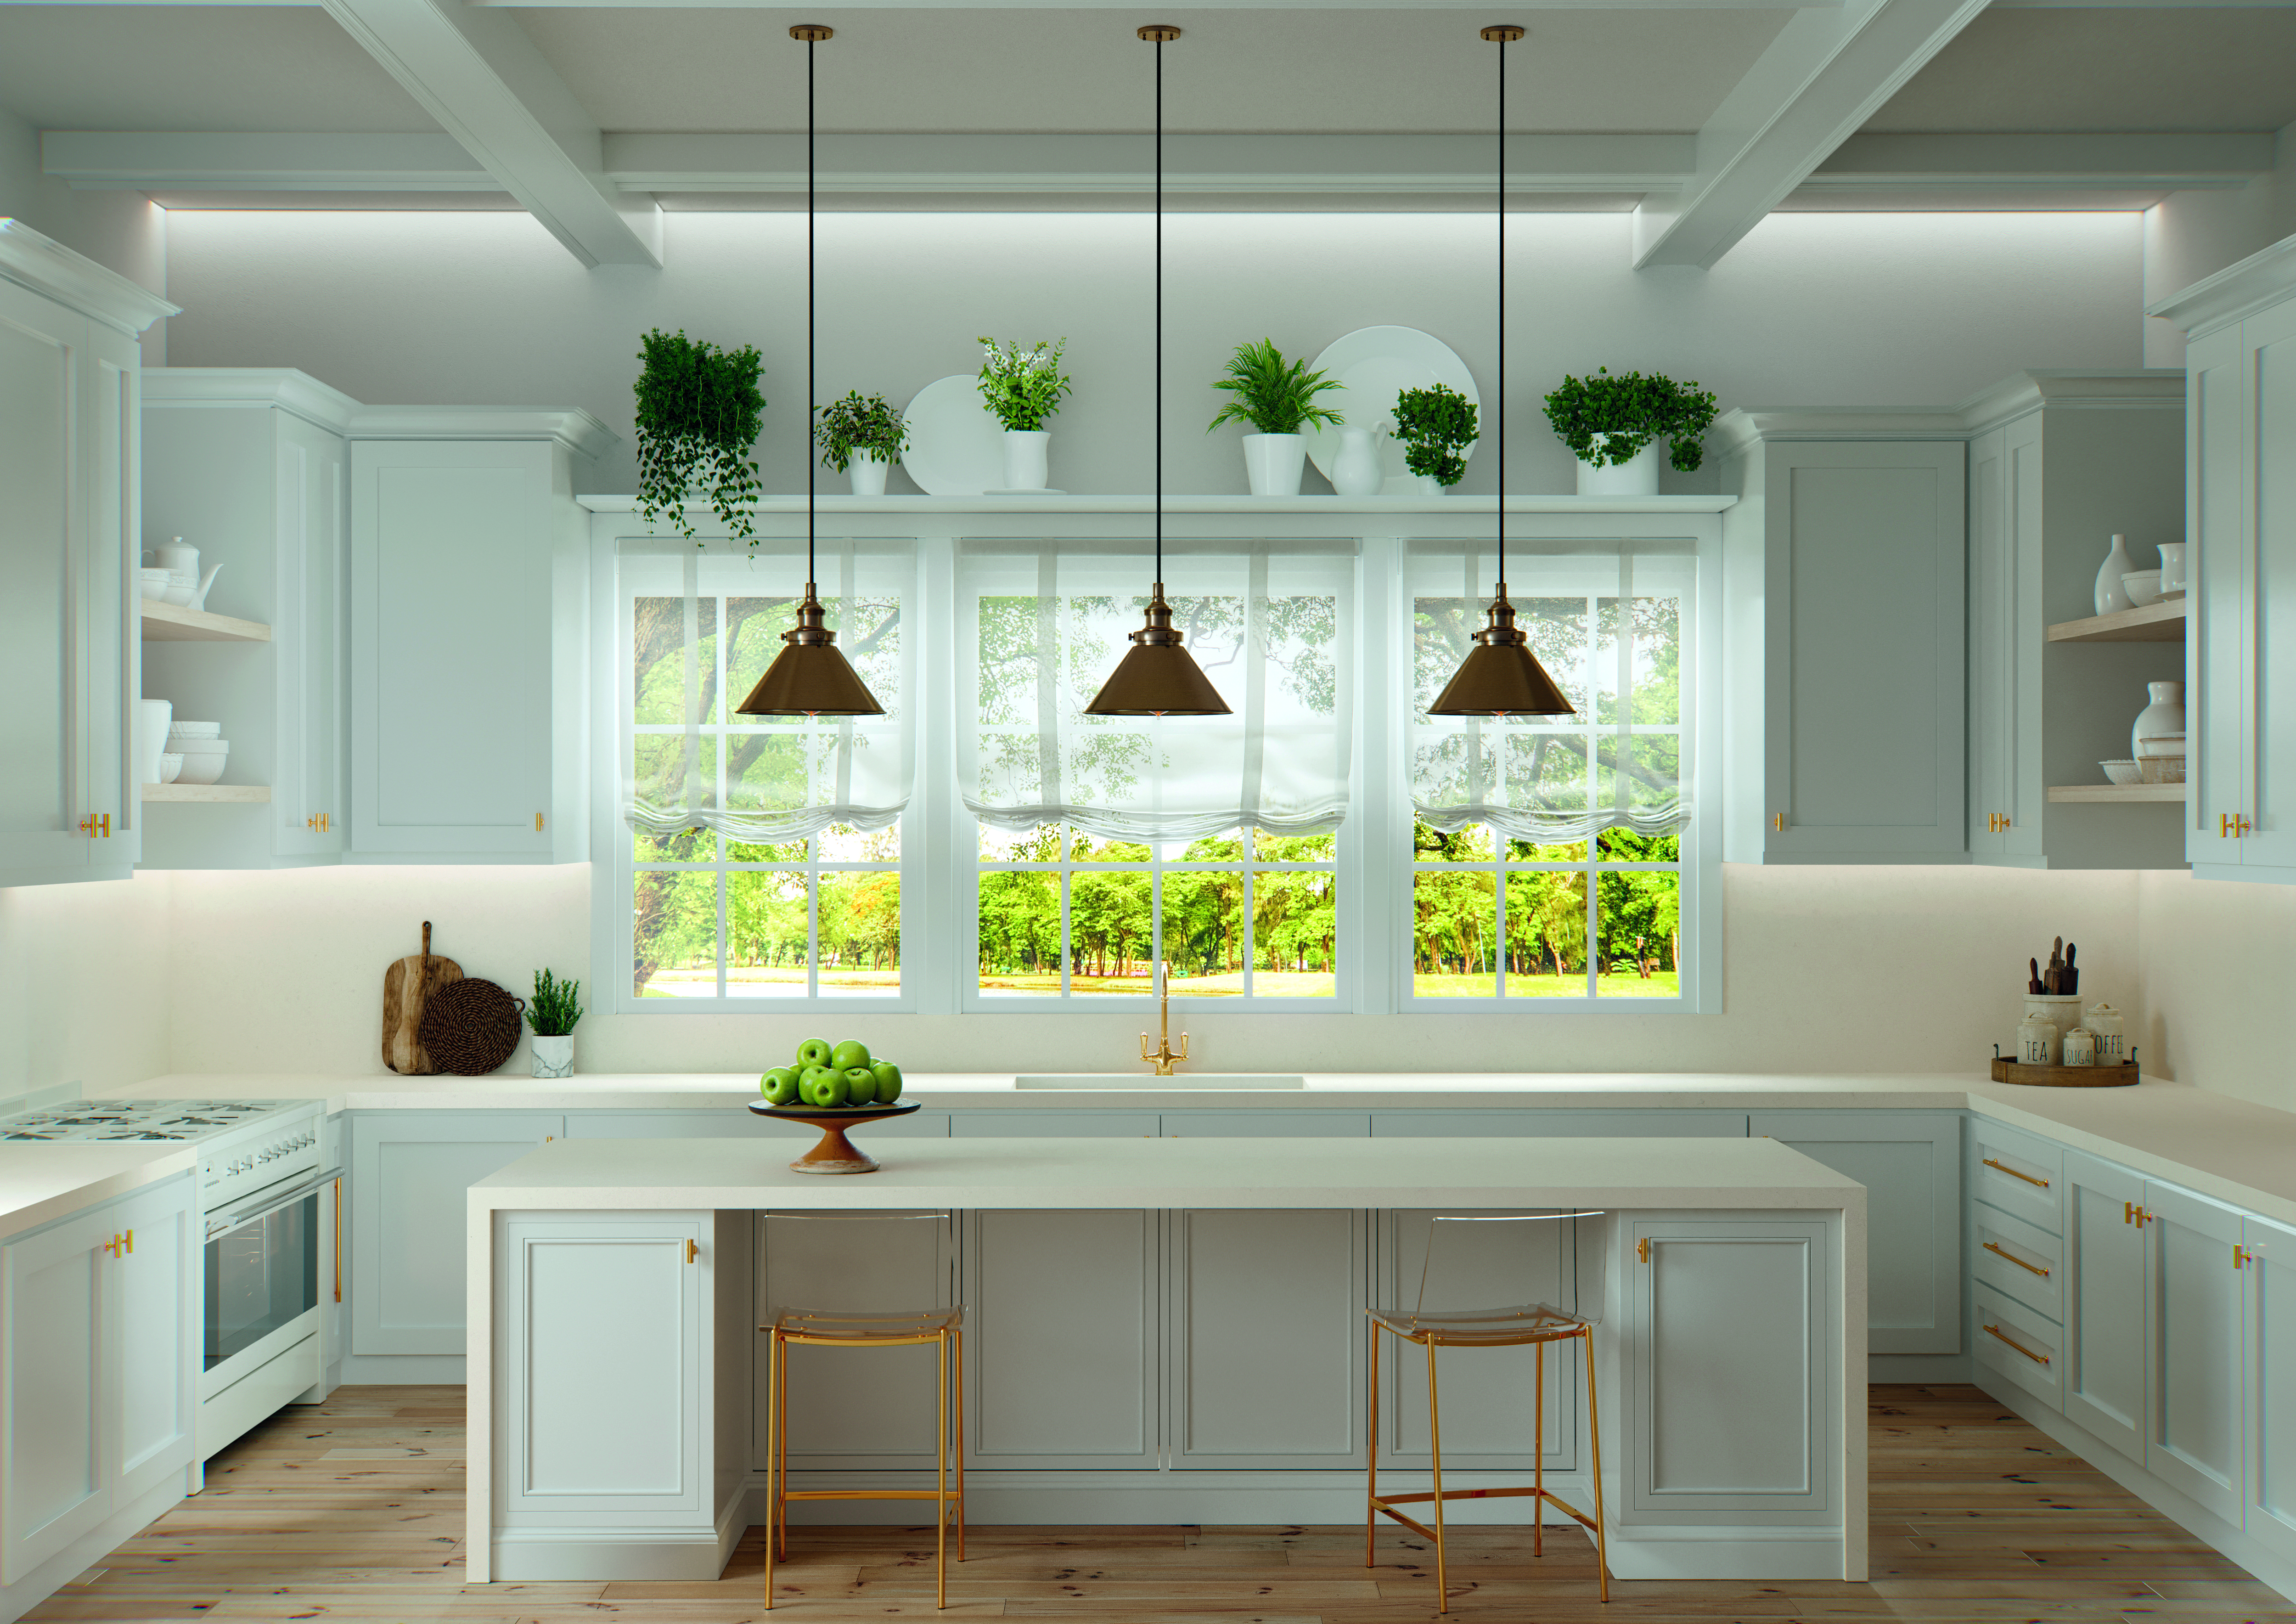 How the beauty of nature can inspire your kitchen design